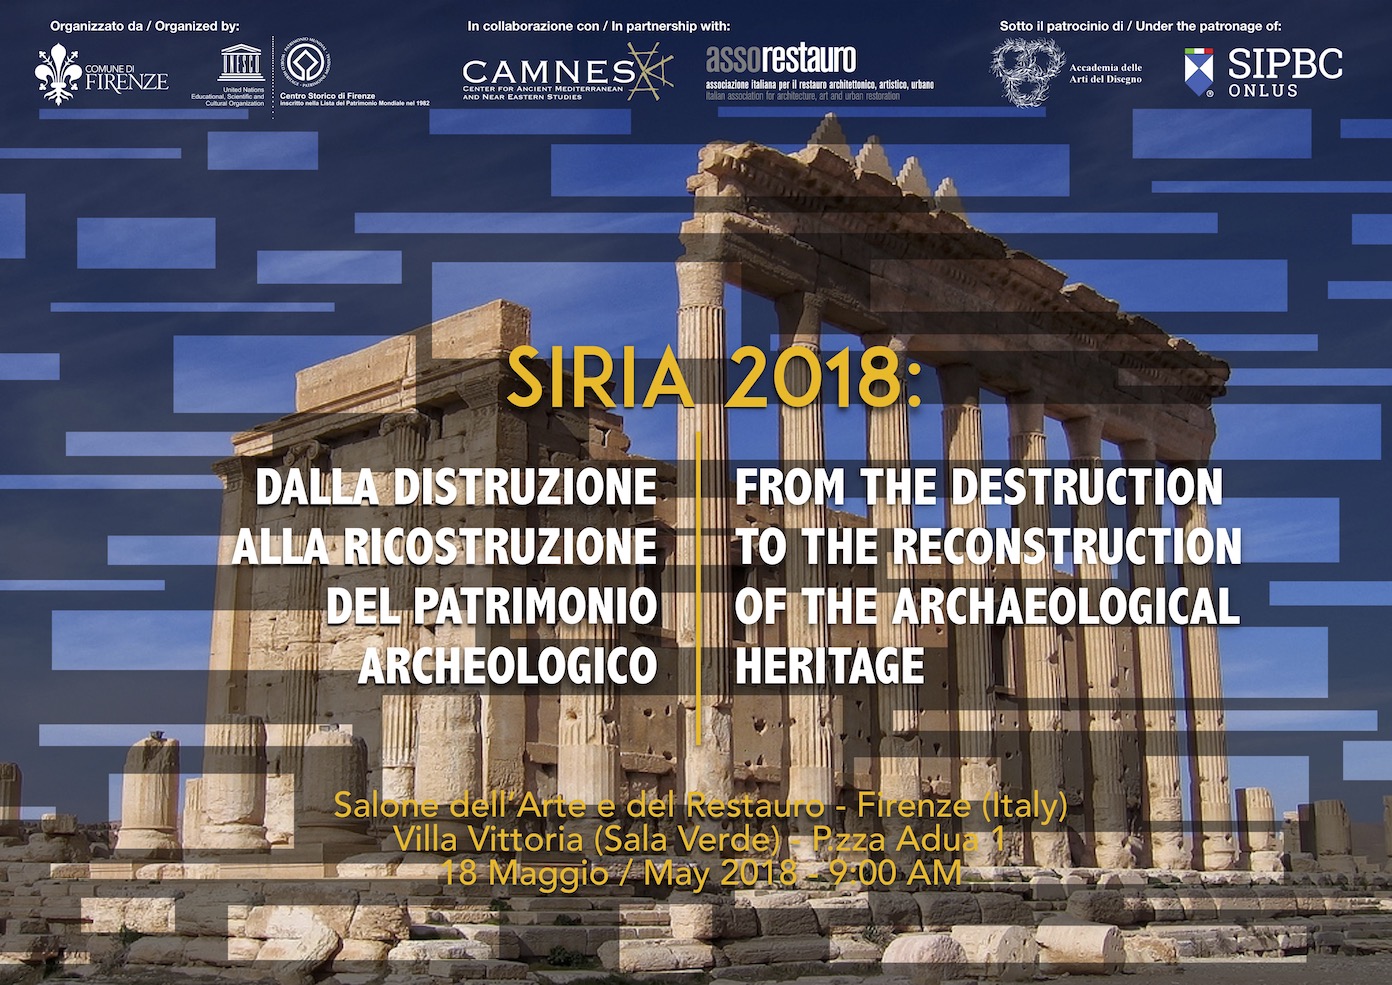 SYRIA 2018: from the destruction to the reconstruction of the Archaeological Heritage 